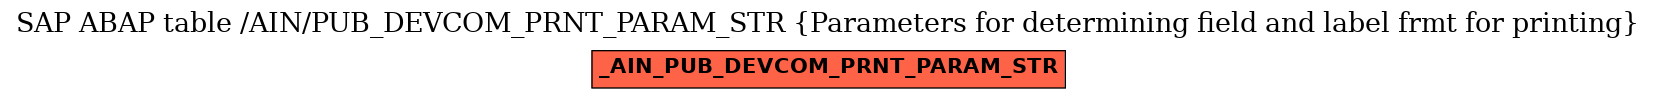 E-R Diagram for table /AIN/PUB_DEVCOM_PRNT_PARAM_STR (Parameters for determining field and label frmt for printing)